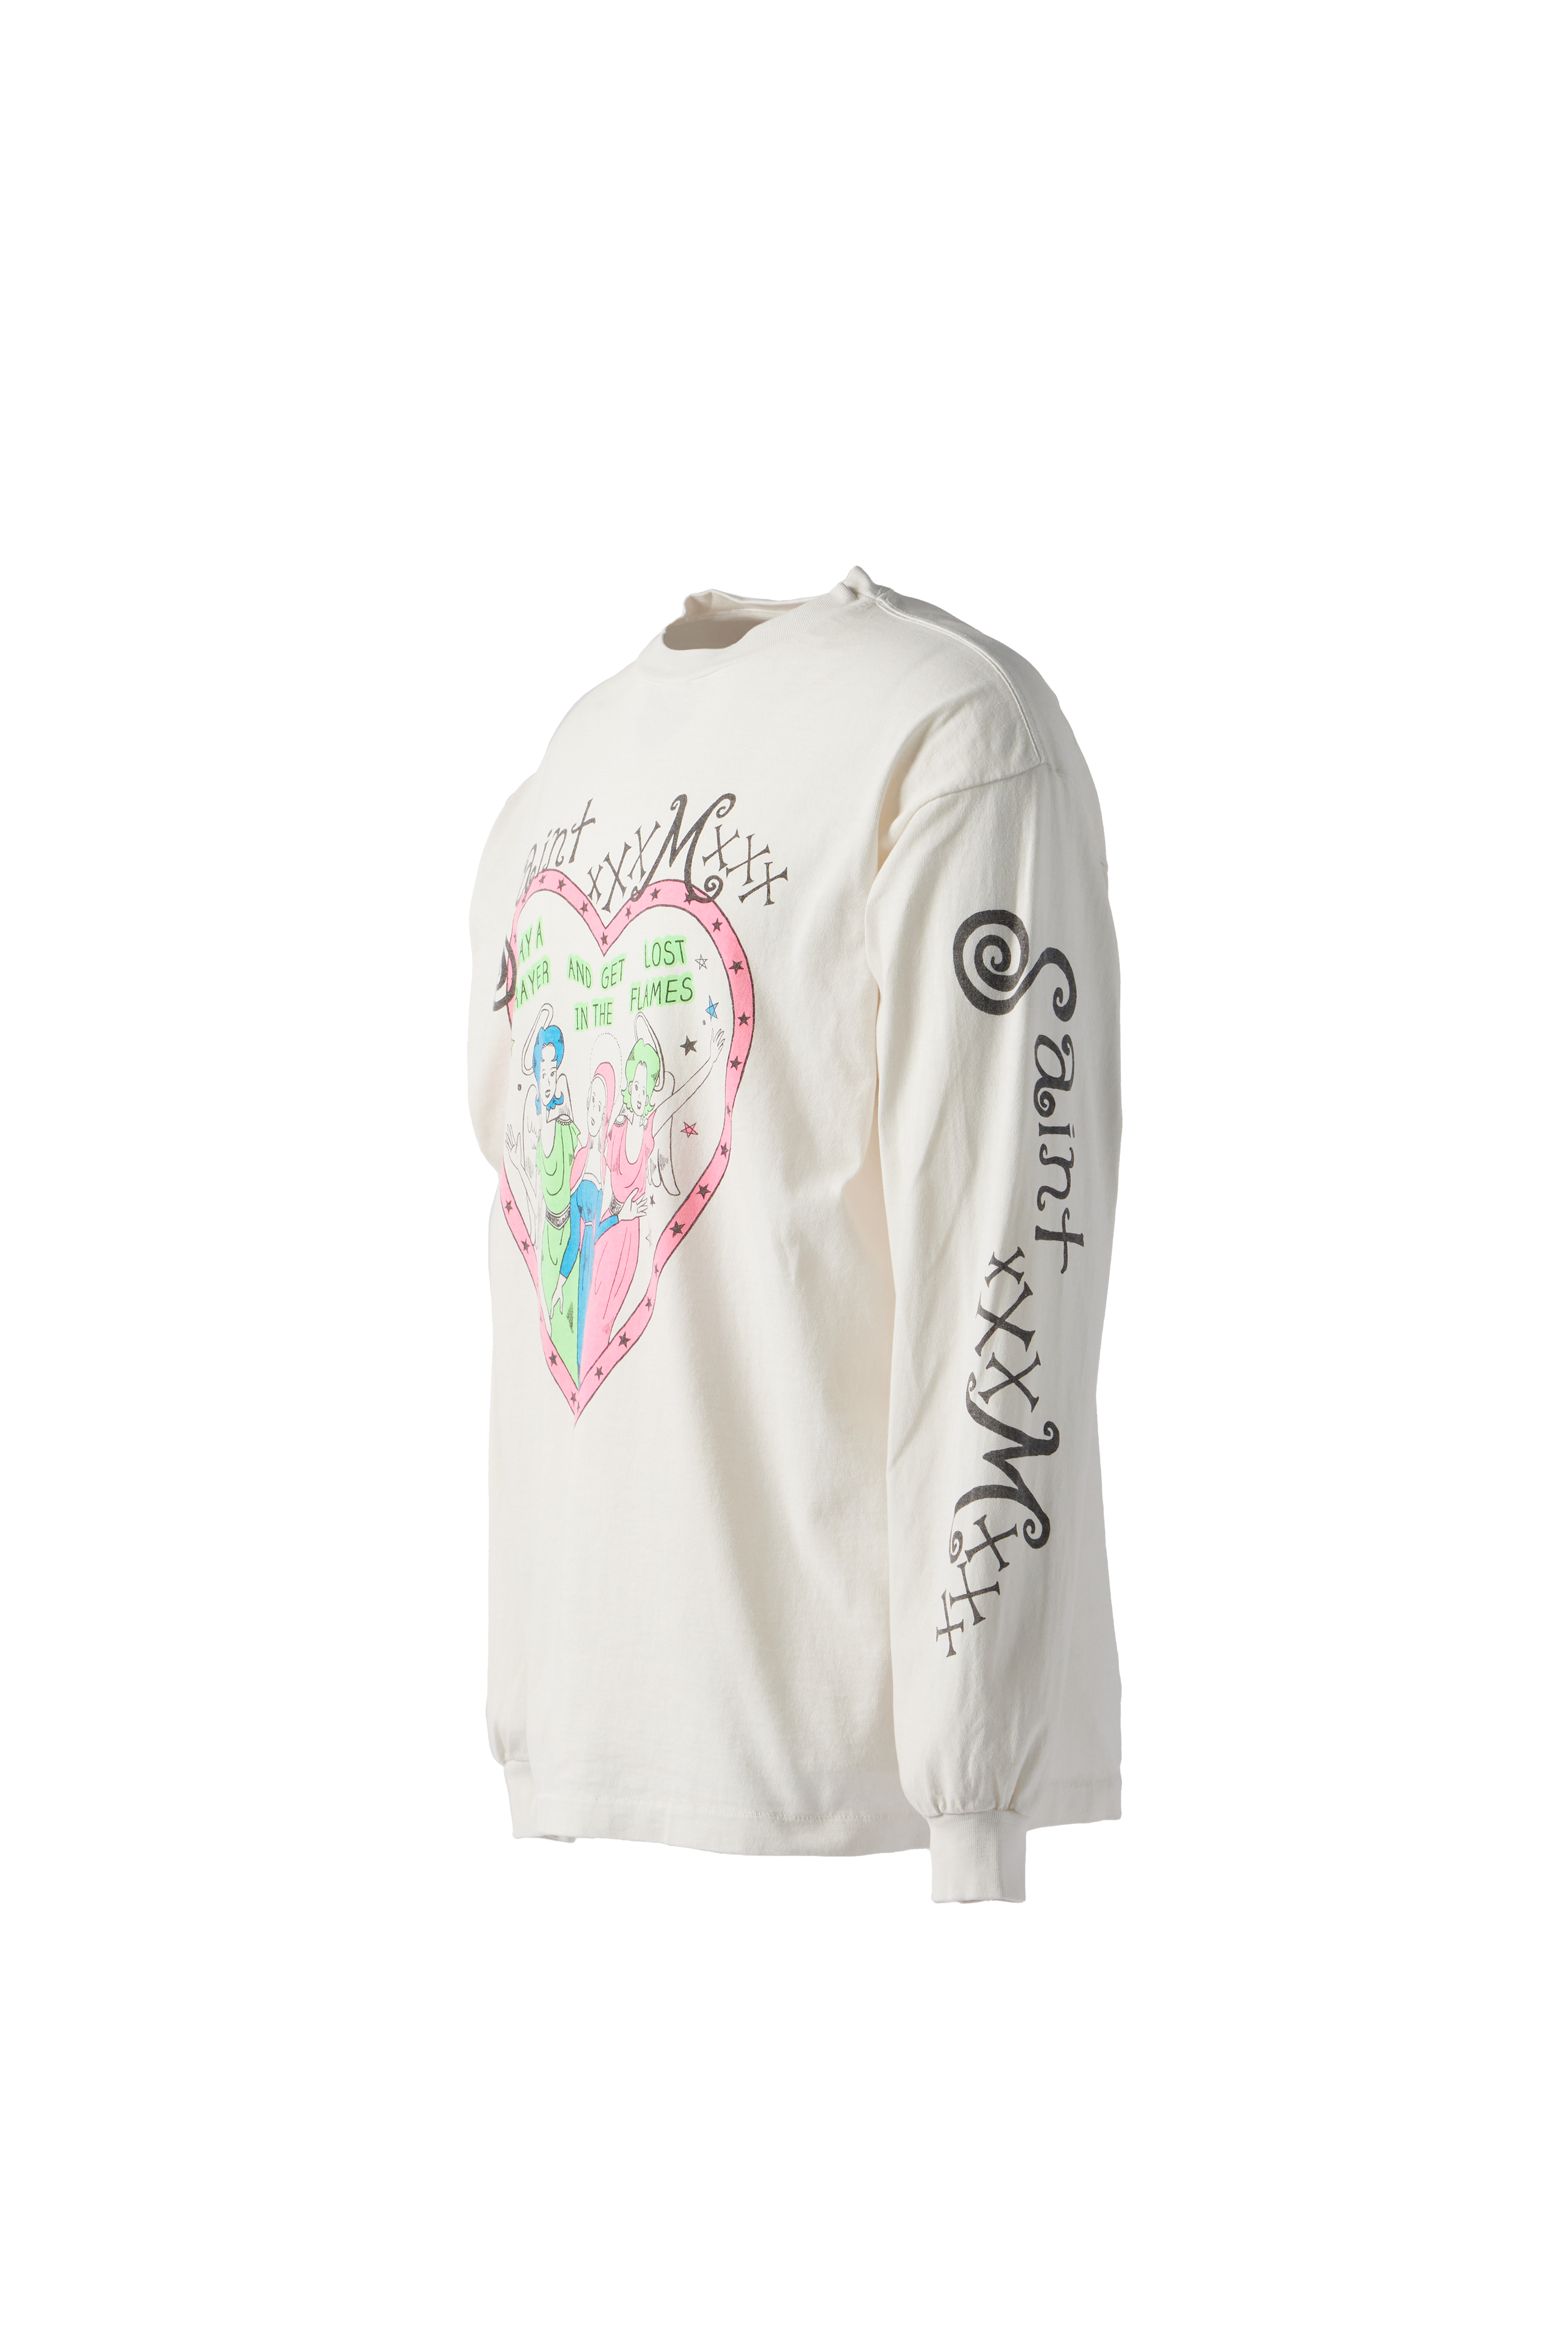 SAINT MXXXXXX - Pink Heart L/S Tee product image